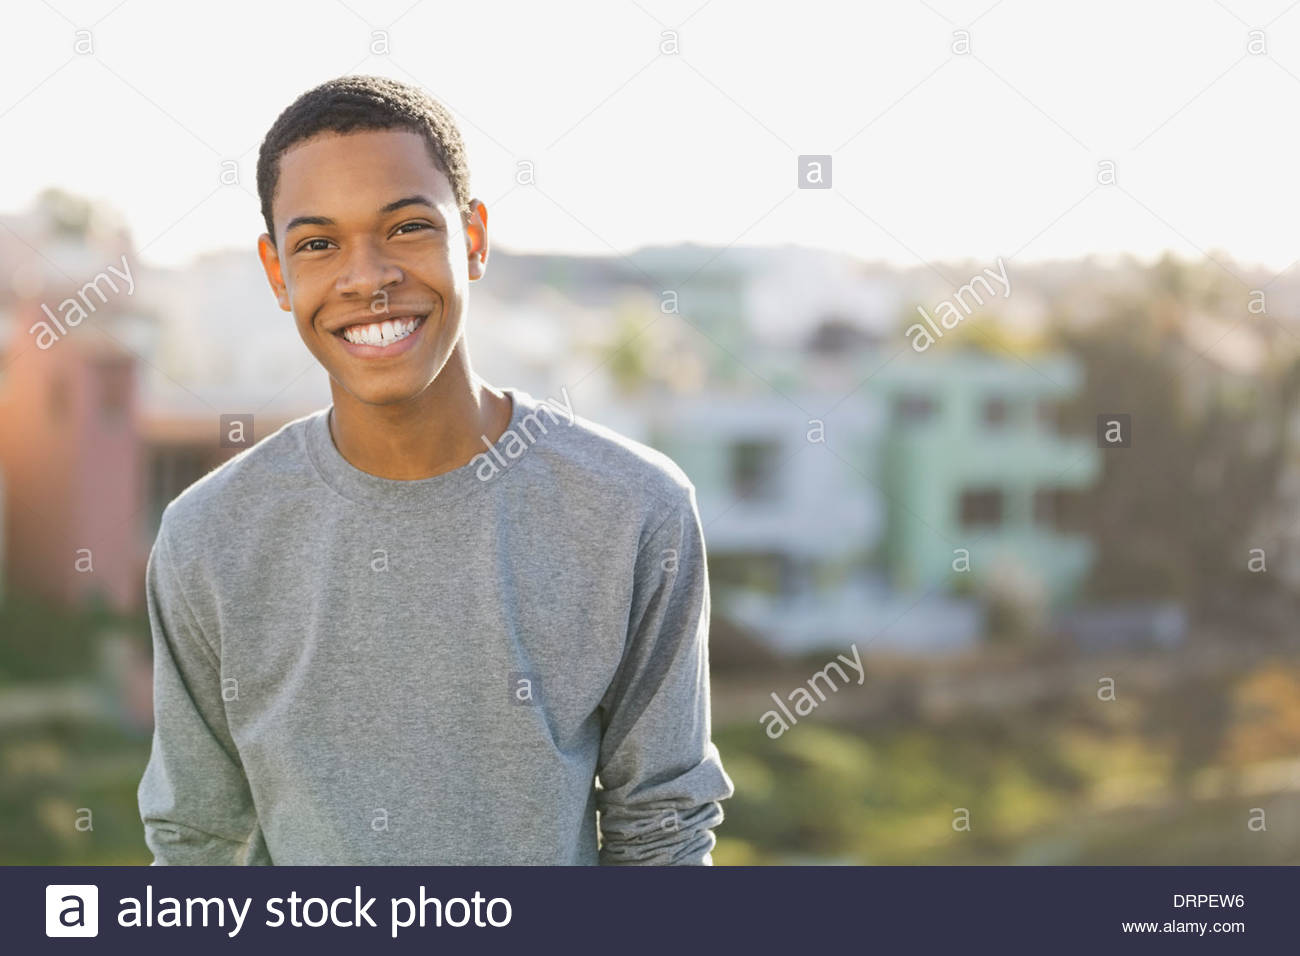 Portrait of smiling young man outdoors Banque D'Images